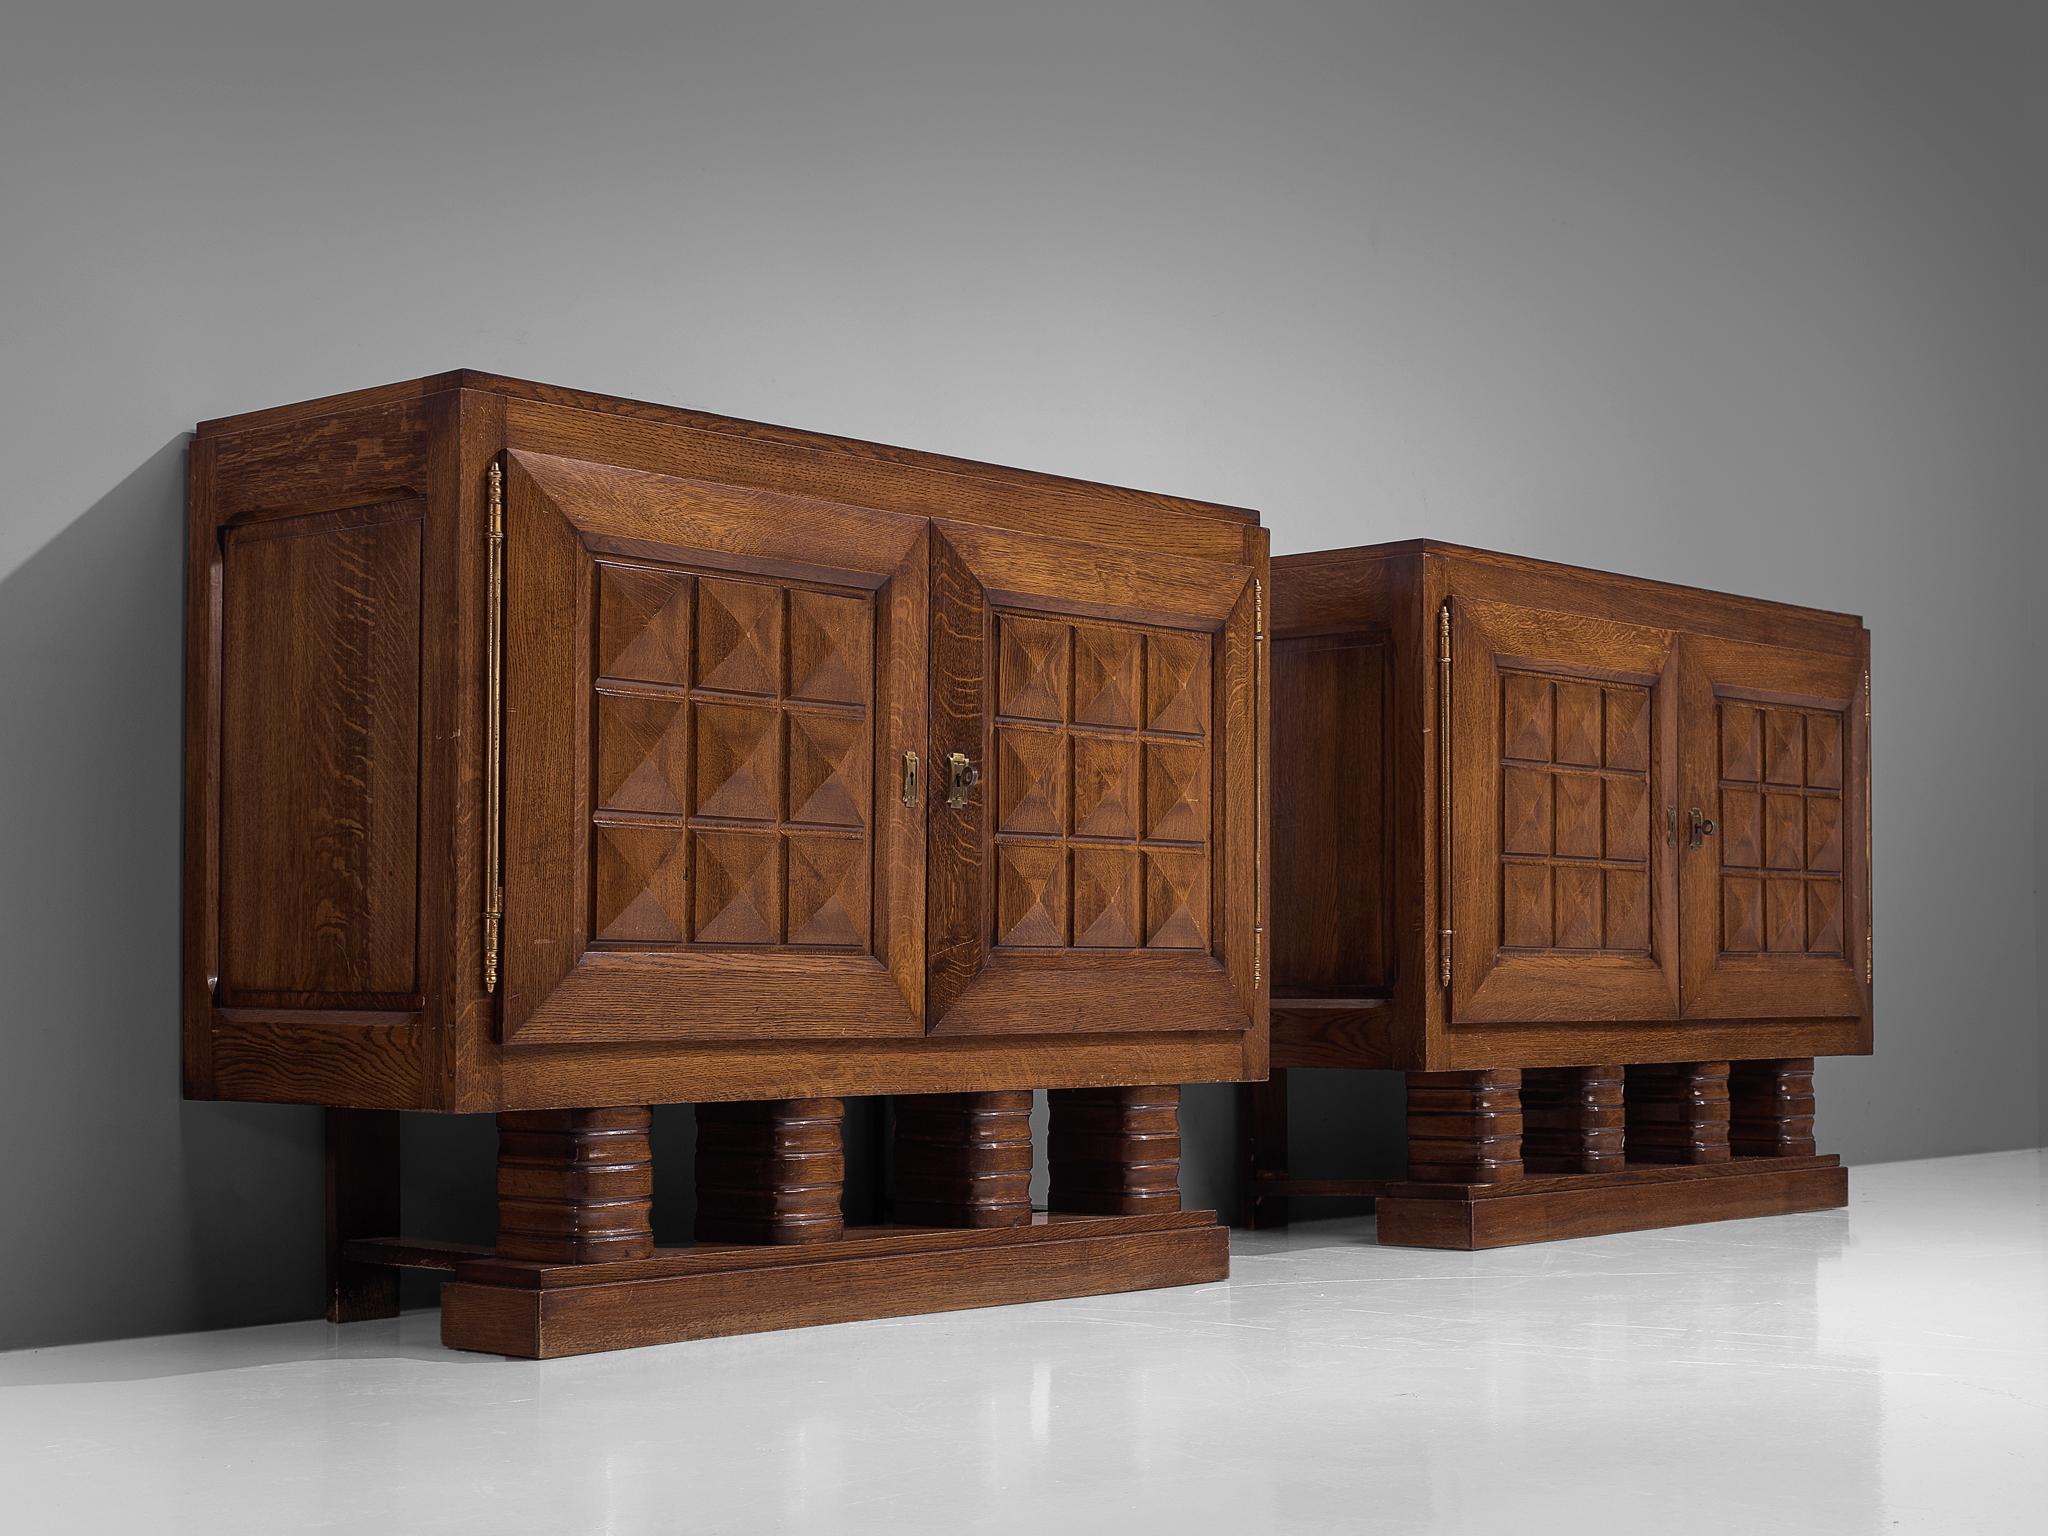 Gaston Poisson, pair of small credenzas, stained oak, France 1930s. 

Sturdy pair of identical credenzas in oak with graphical doorpanels. These sideboards are equipped with several shelves which provide plenty of storage space. The doorpanels and